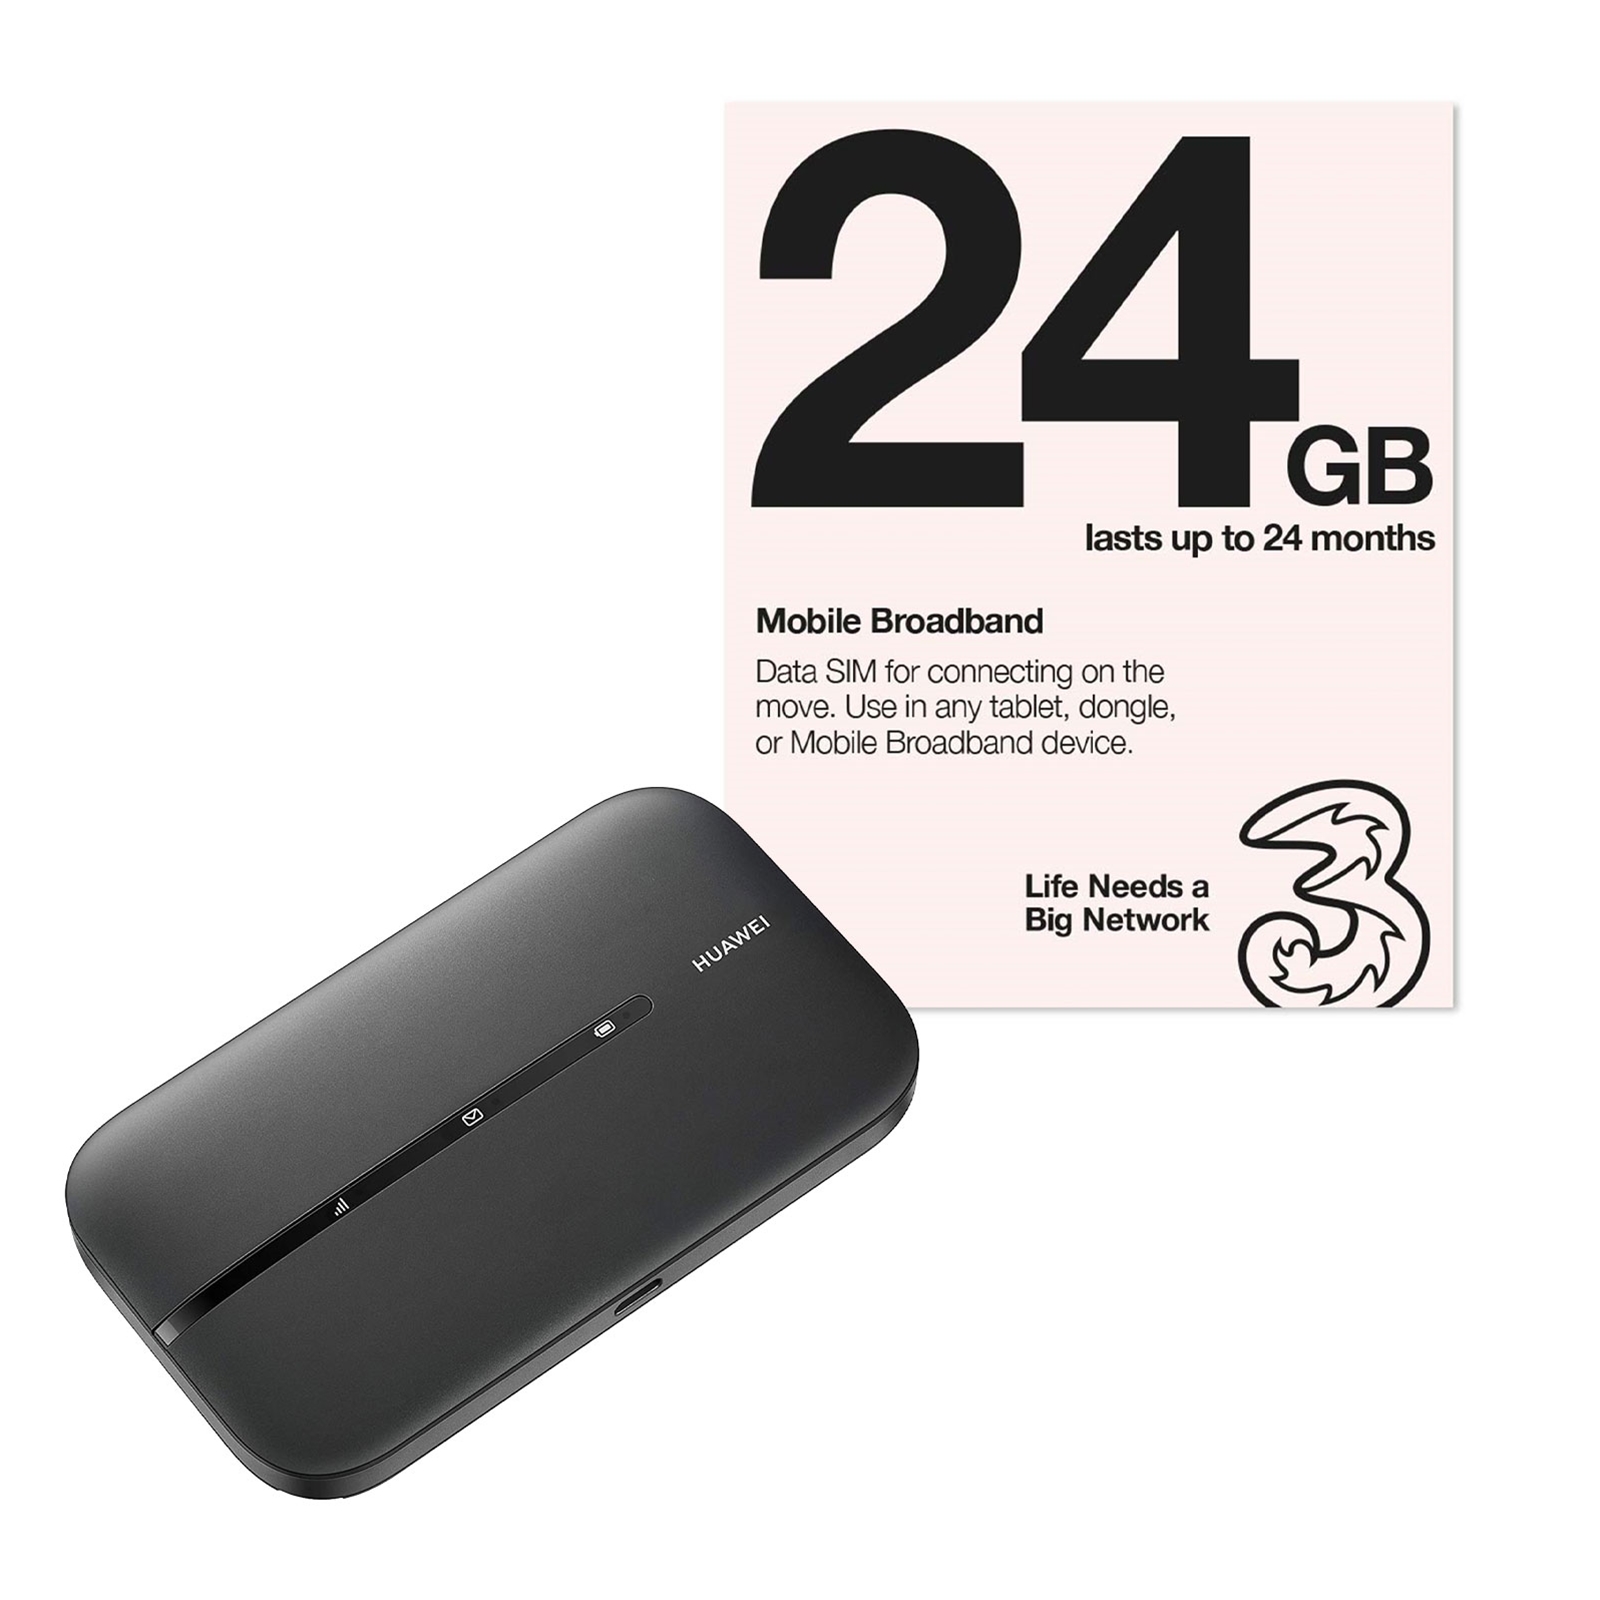 DSTHR-35049BUNDL THREE Three 5 x 24GB Trio Pay As You Go Mobile Broadband SIM Cards with 1/2 Price Huawei E5783 4G+ MiFi Mobile Broadband Router